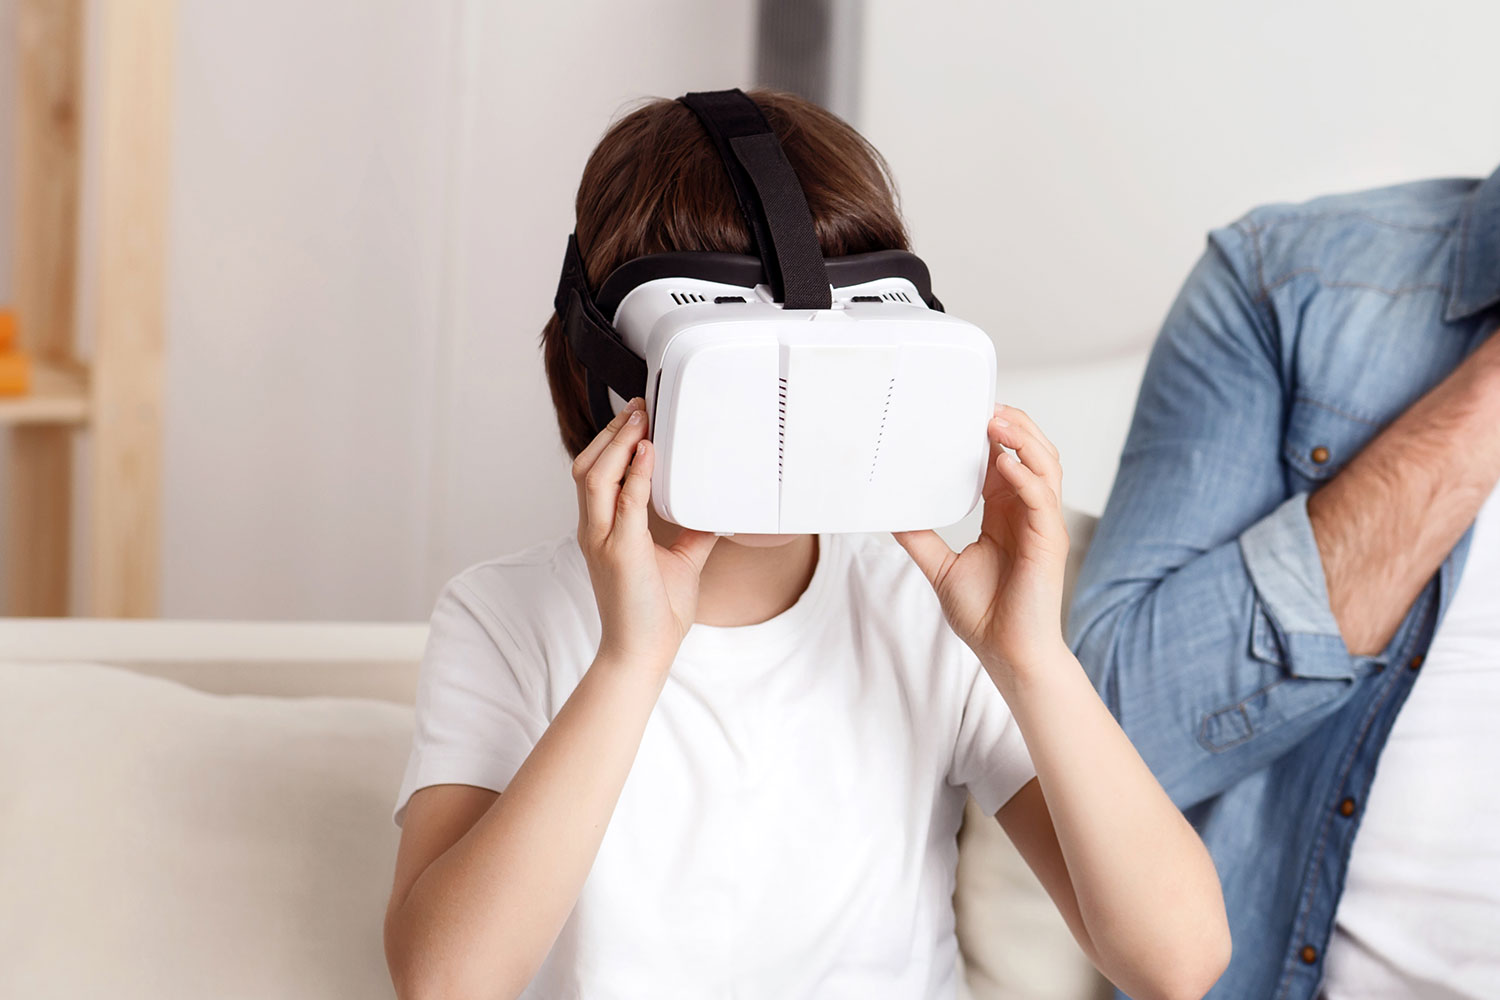 What age is VR OK?